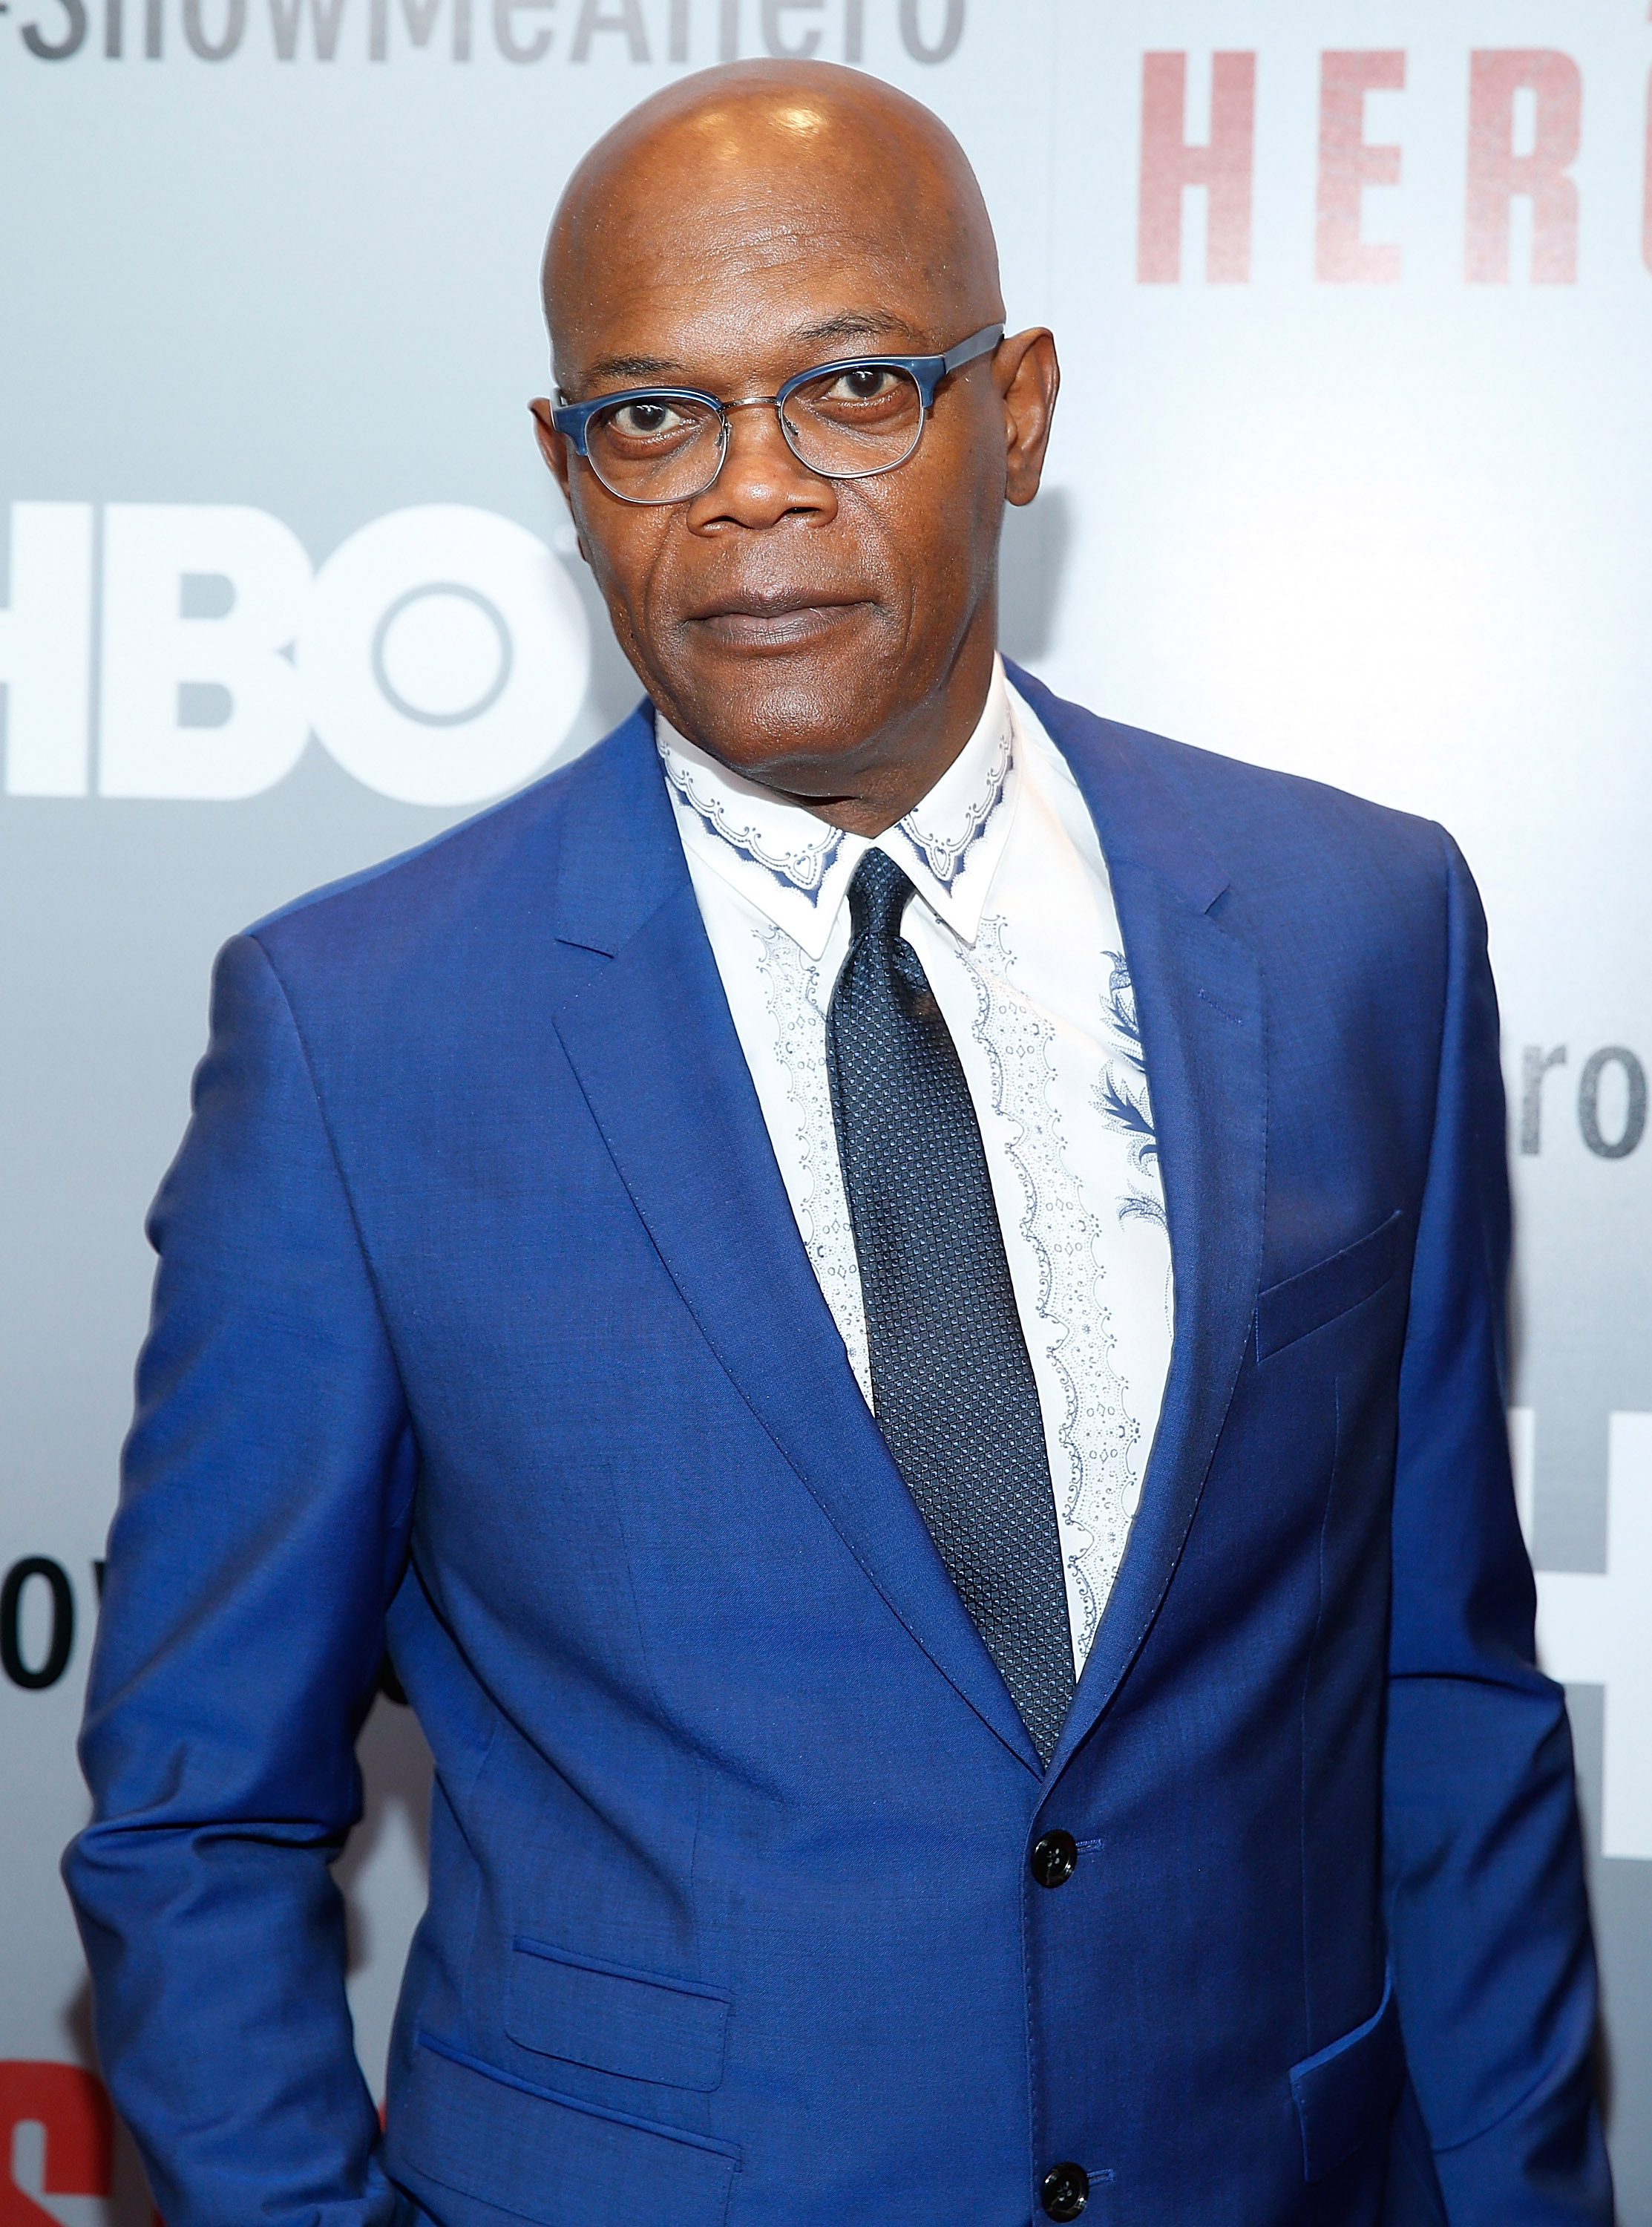 Samuel L. Jackson attends the screening of "Show Me A Hero" on August 11, 2015 in New York City. | Source: Getty Images